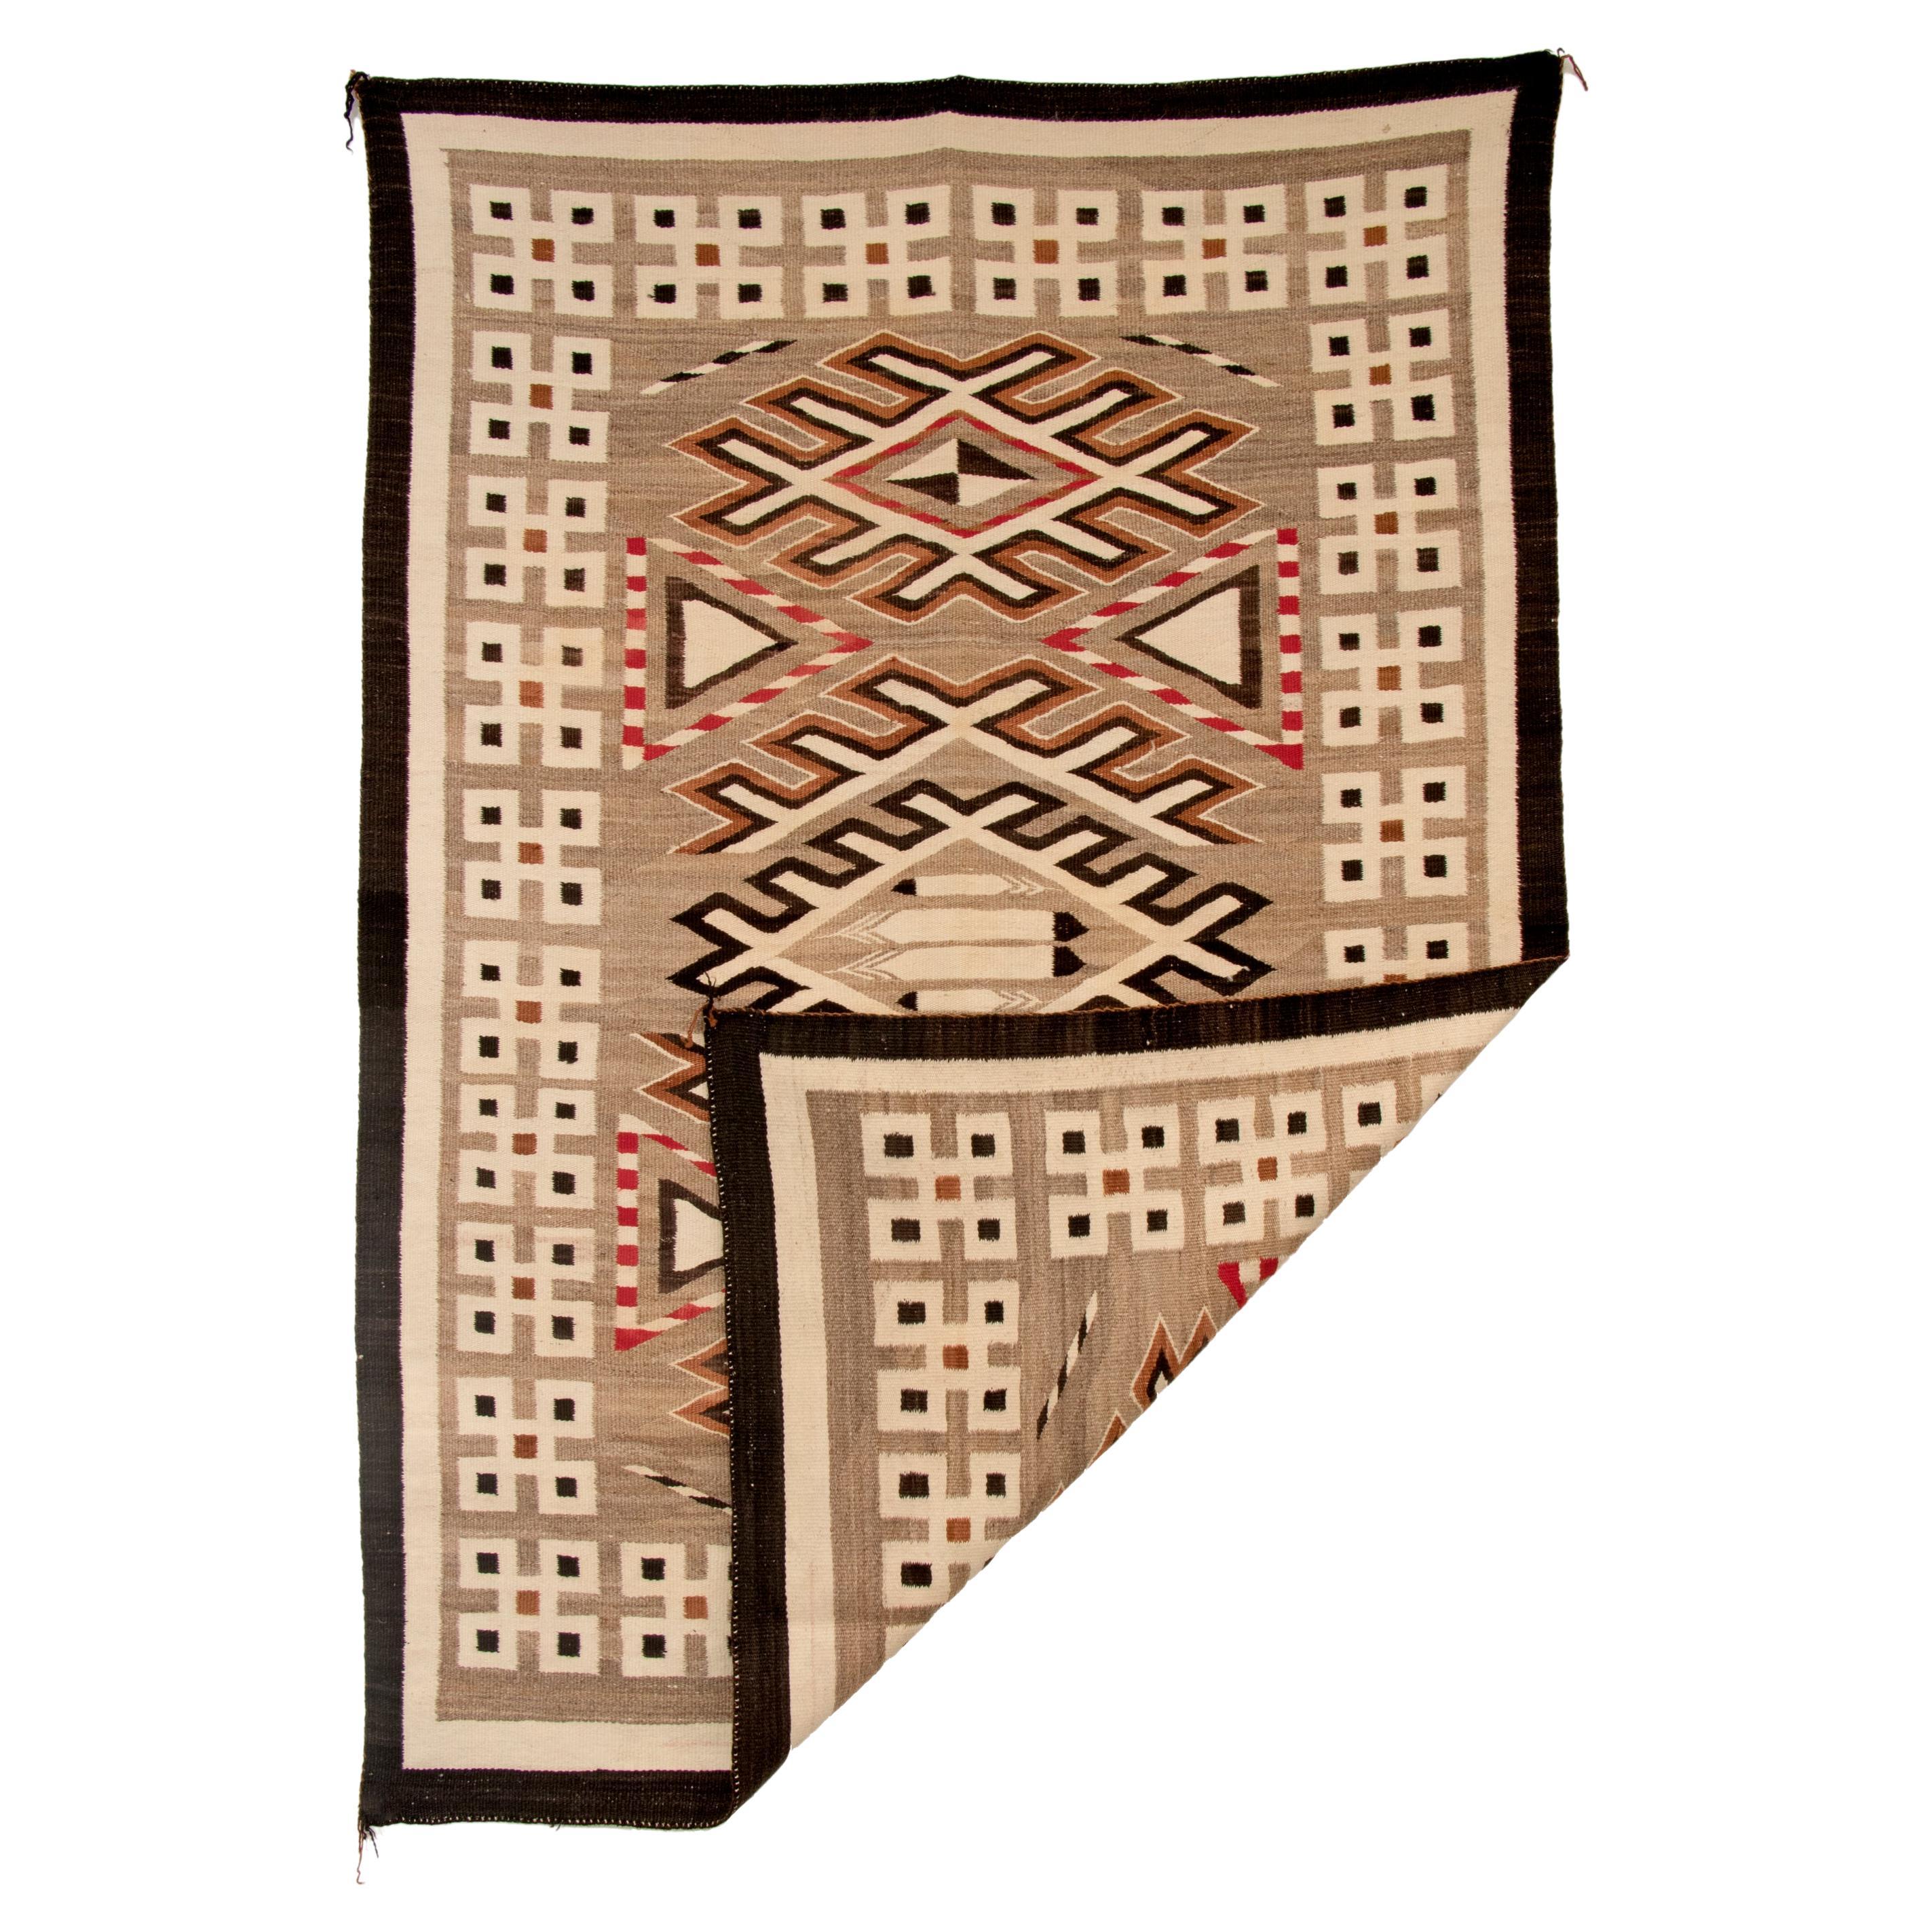 Vintage Navajo rug with a pictorial design from the Trading Post era rug woven of native hand-spun wool in natural fleece colors of ivory, brown and black with aniline red, circa 1900-1925. Central design elements include of three stylized diamonds